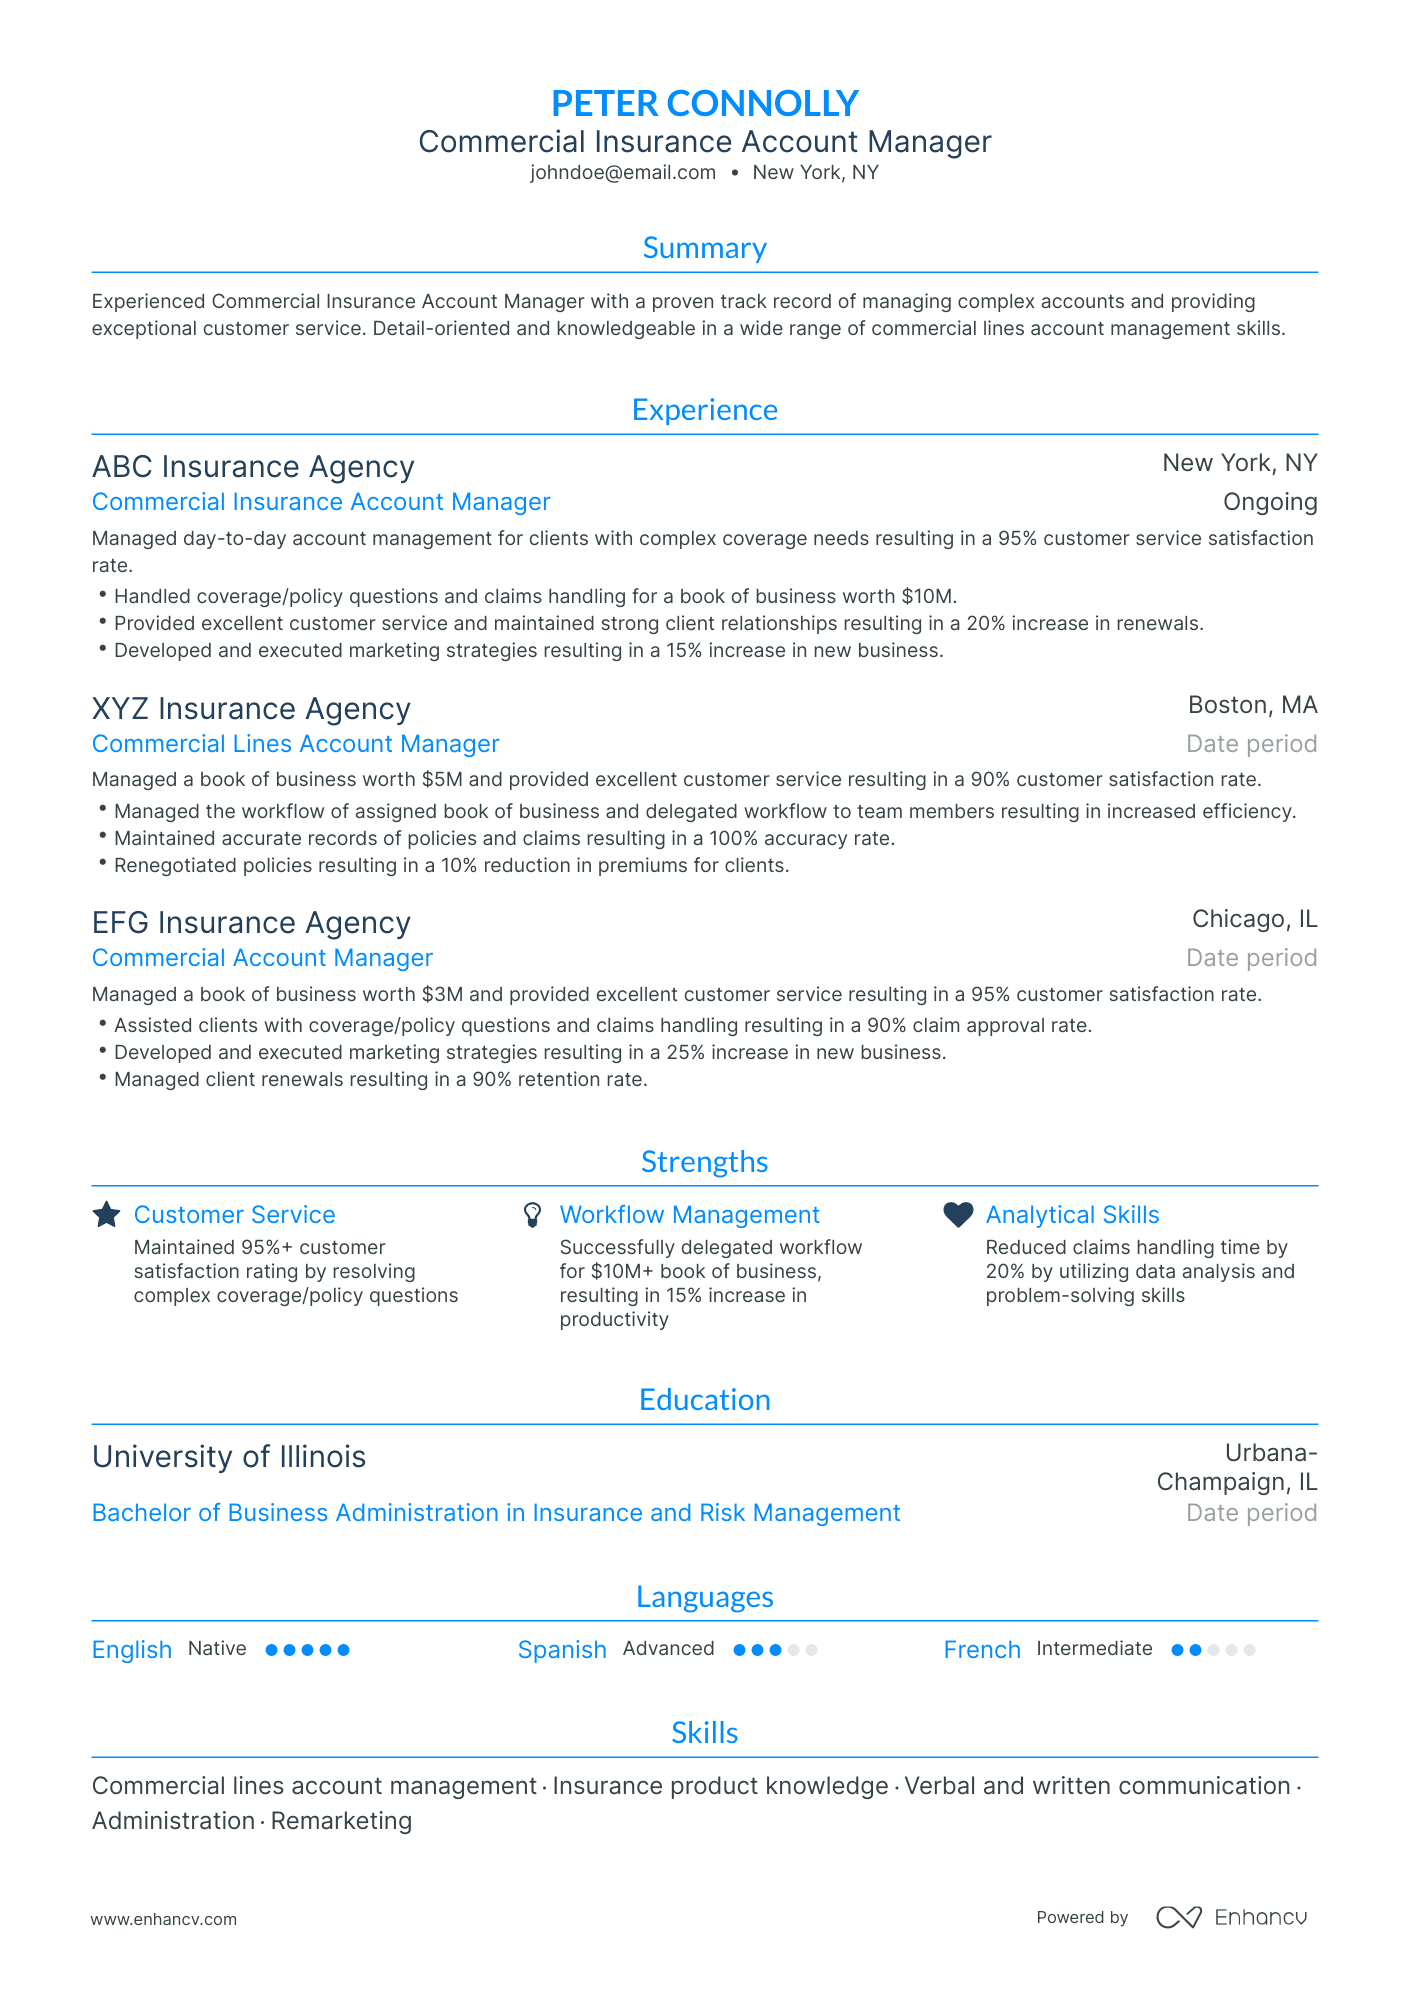 Traditional Commercial Account Manager Resume Template